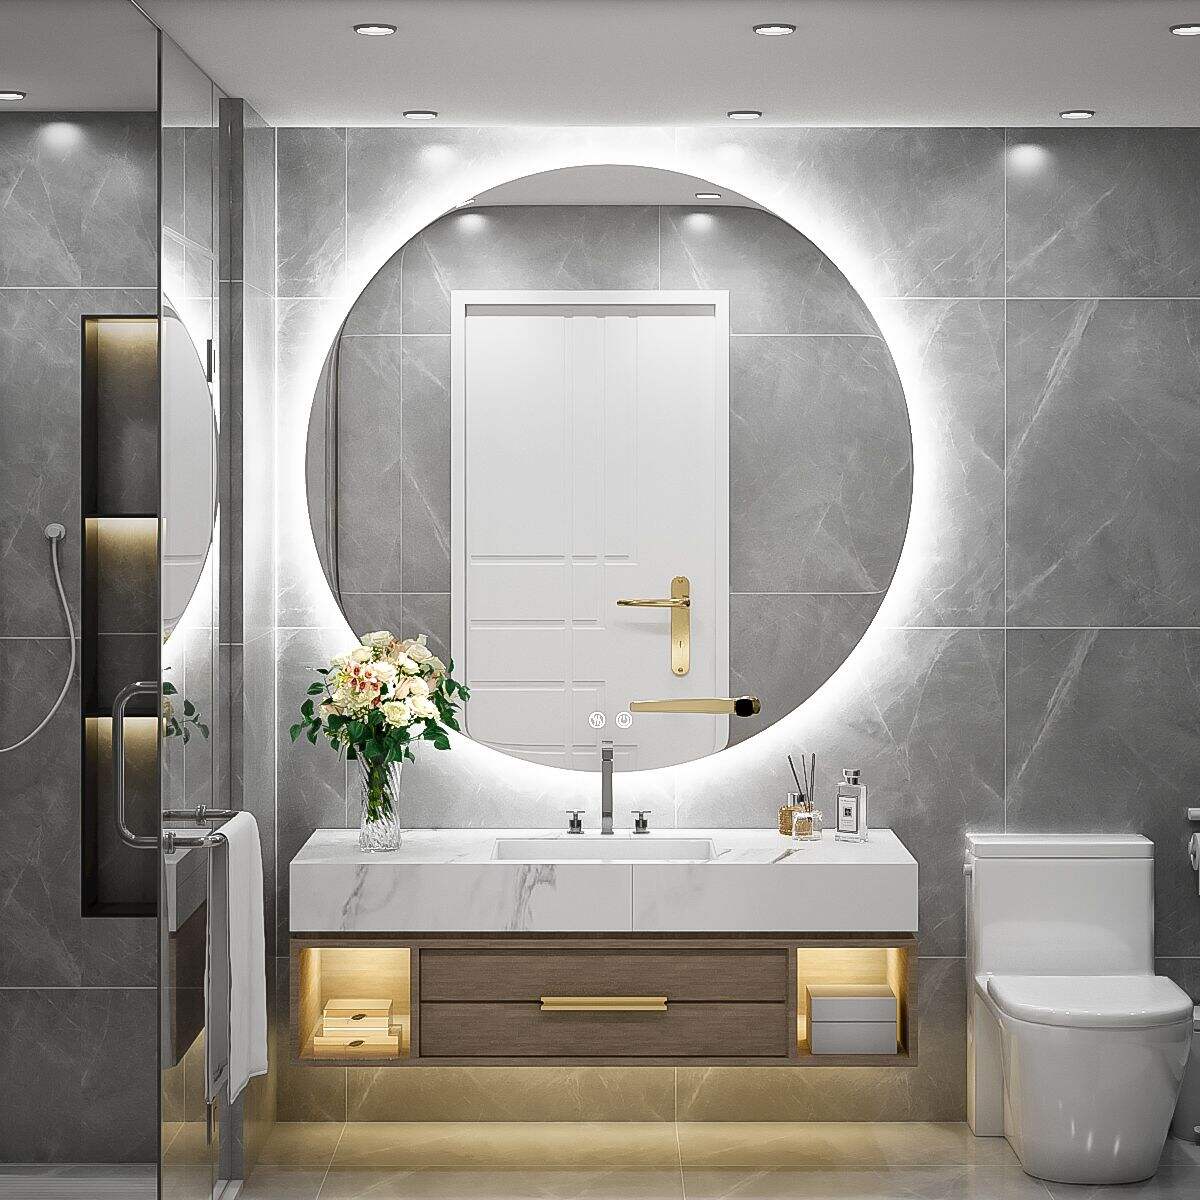 JJGullit bathroom mirror supplier 40 Inch Round LED Backlit Mirror, Bathroom Vanity Mirror with Lights, Circle Lighted Mirror, Wall Mounted Anti-Fog Dimmable LED Makeup Mirror for Bedroom, Touch Switch and C